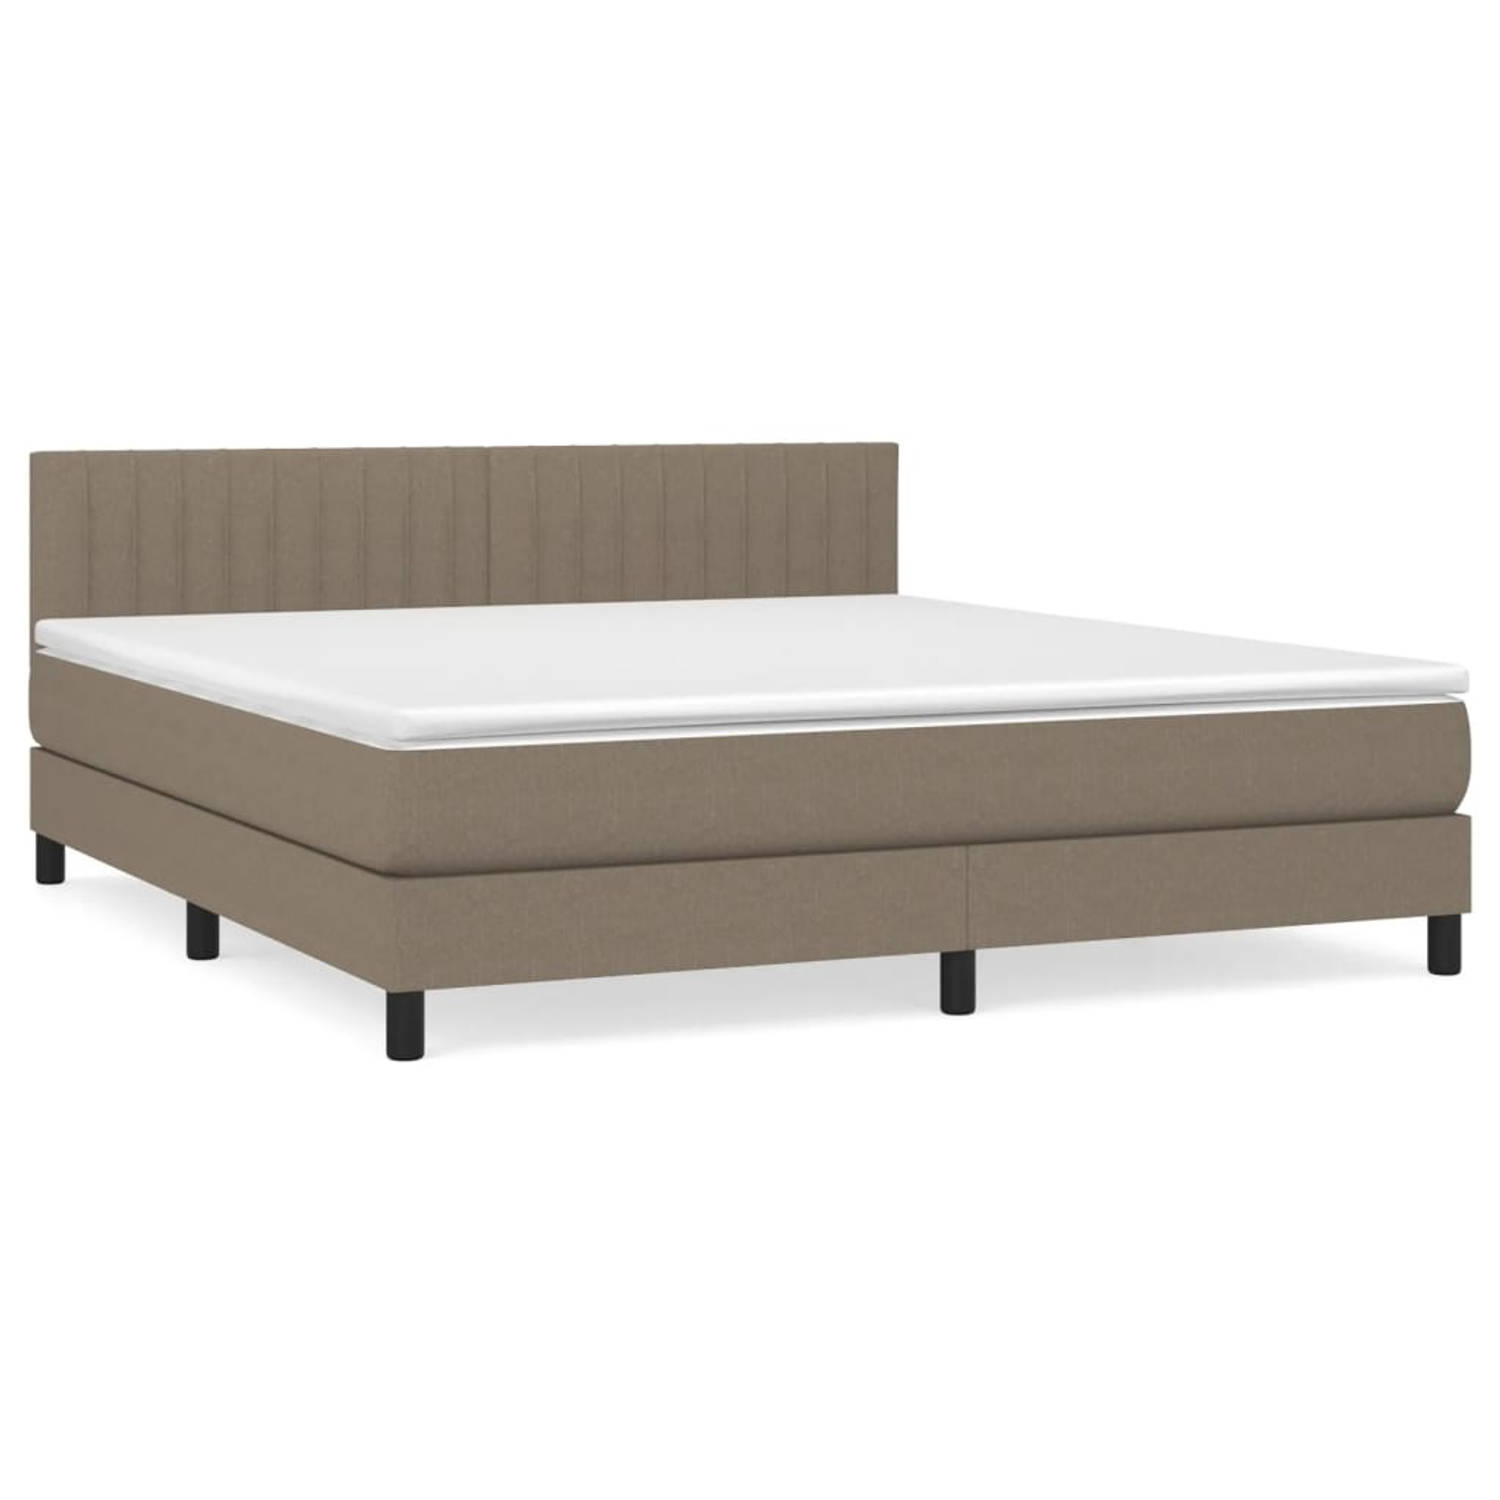 The Living Store Boxspring met matras stof taupe 180x200 cm - Bed